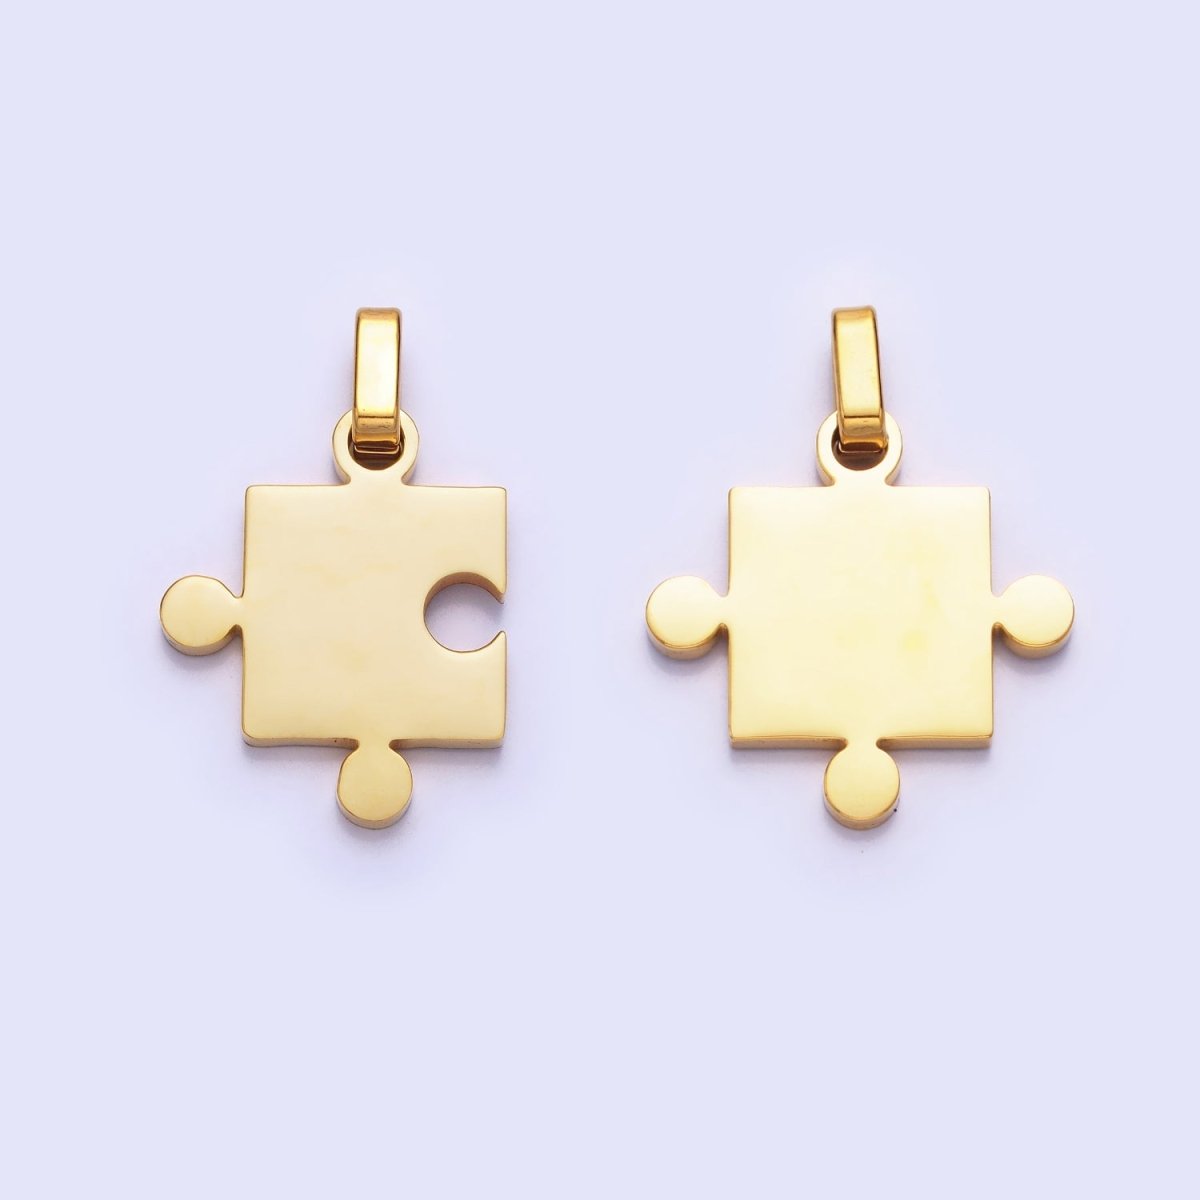 Stainless Steel Puzzle Couple's Friendship Pendant Mix & Match Set in Gold & Silver | P1109 - DLUXCA